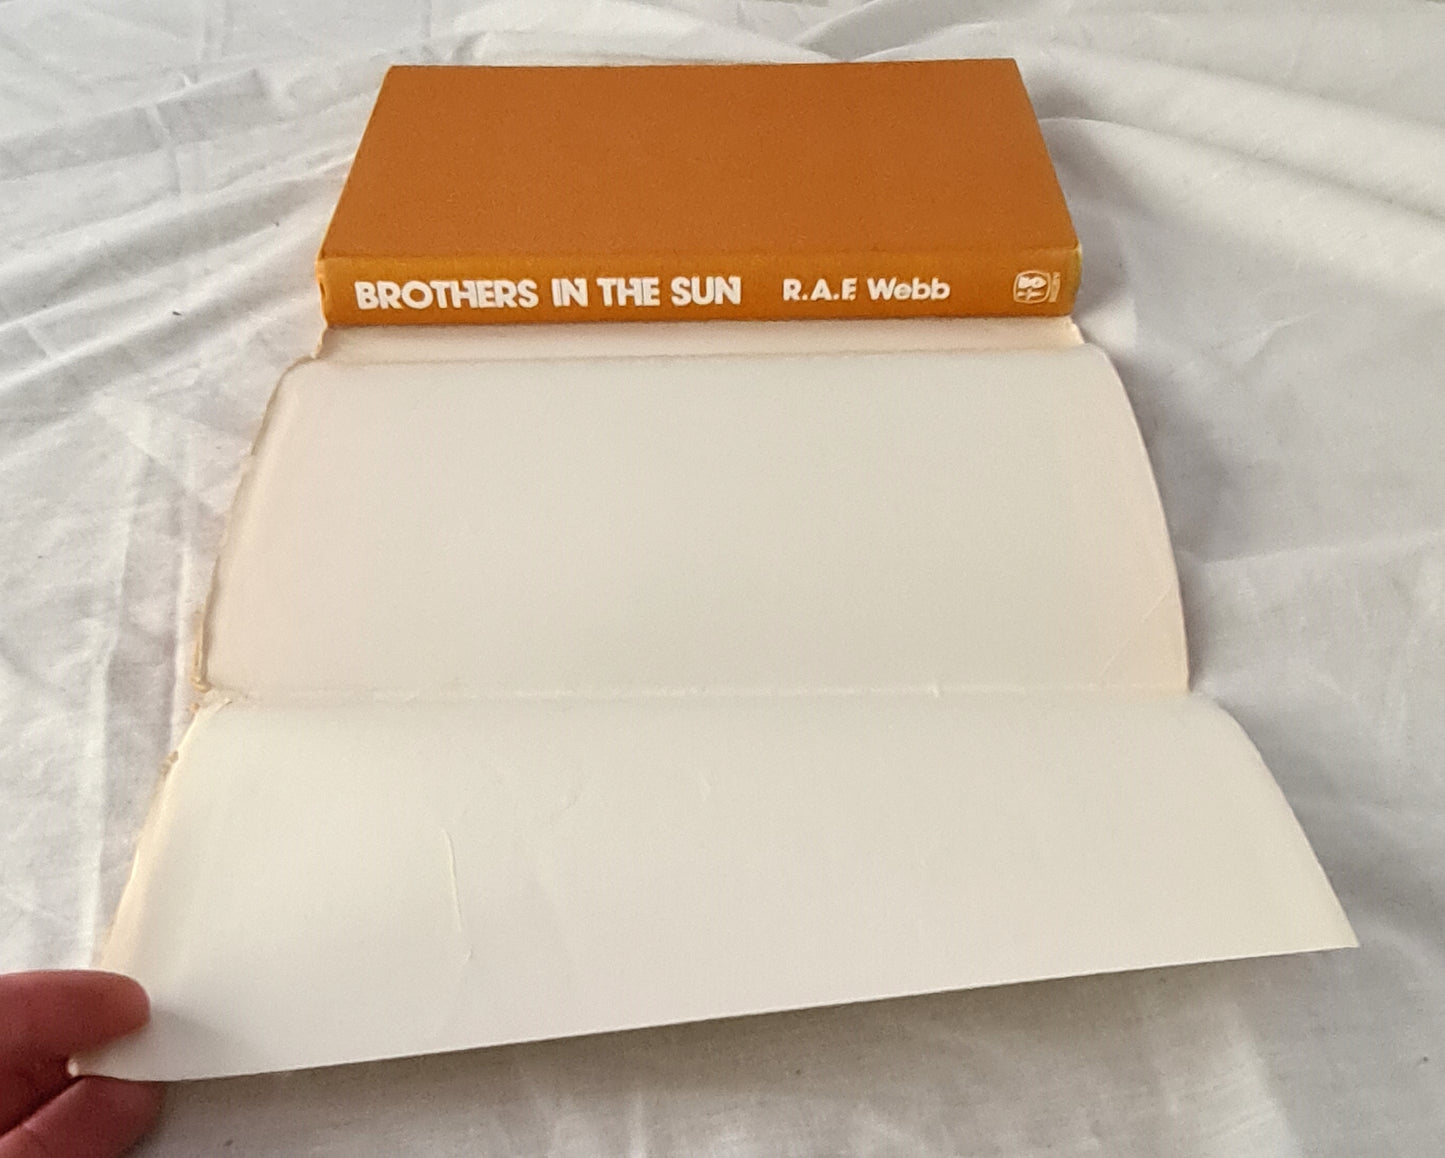 Brothers In The Sun by R. A. F. Webb